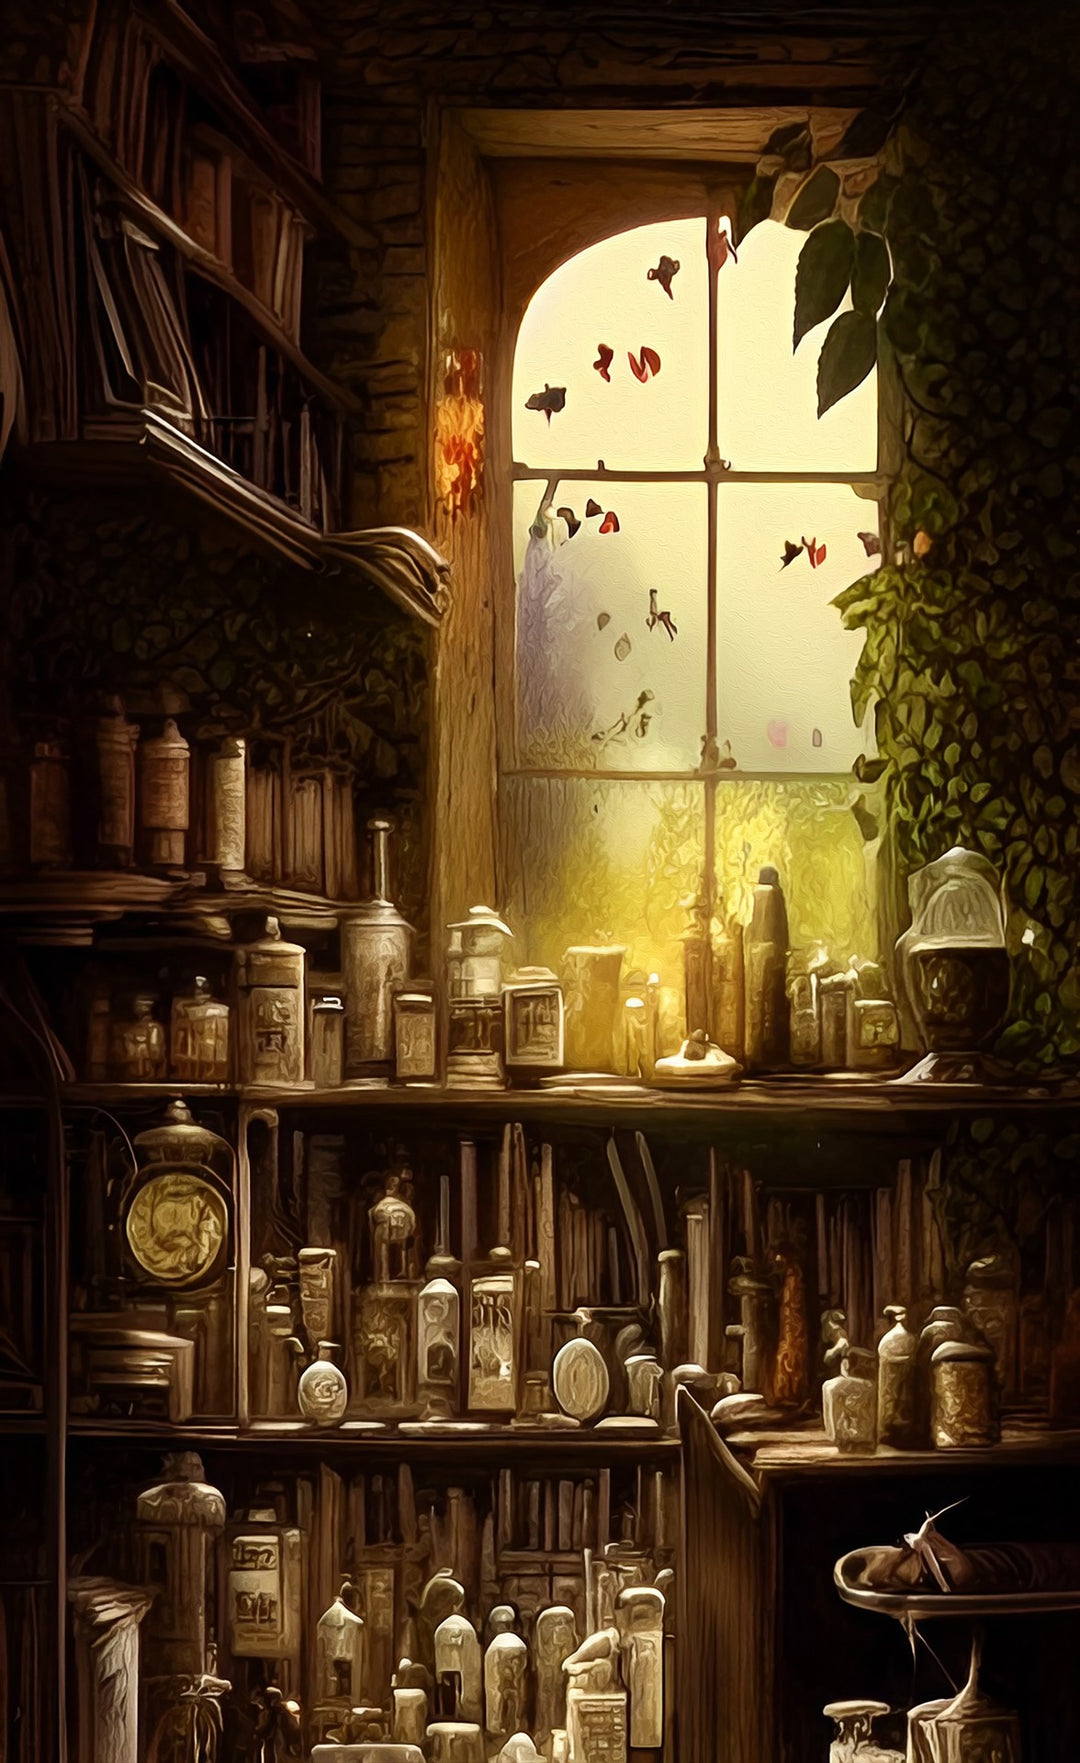 tower window with strange and wondrous jars and bottles